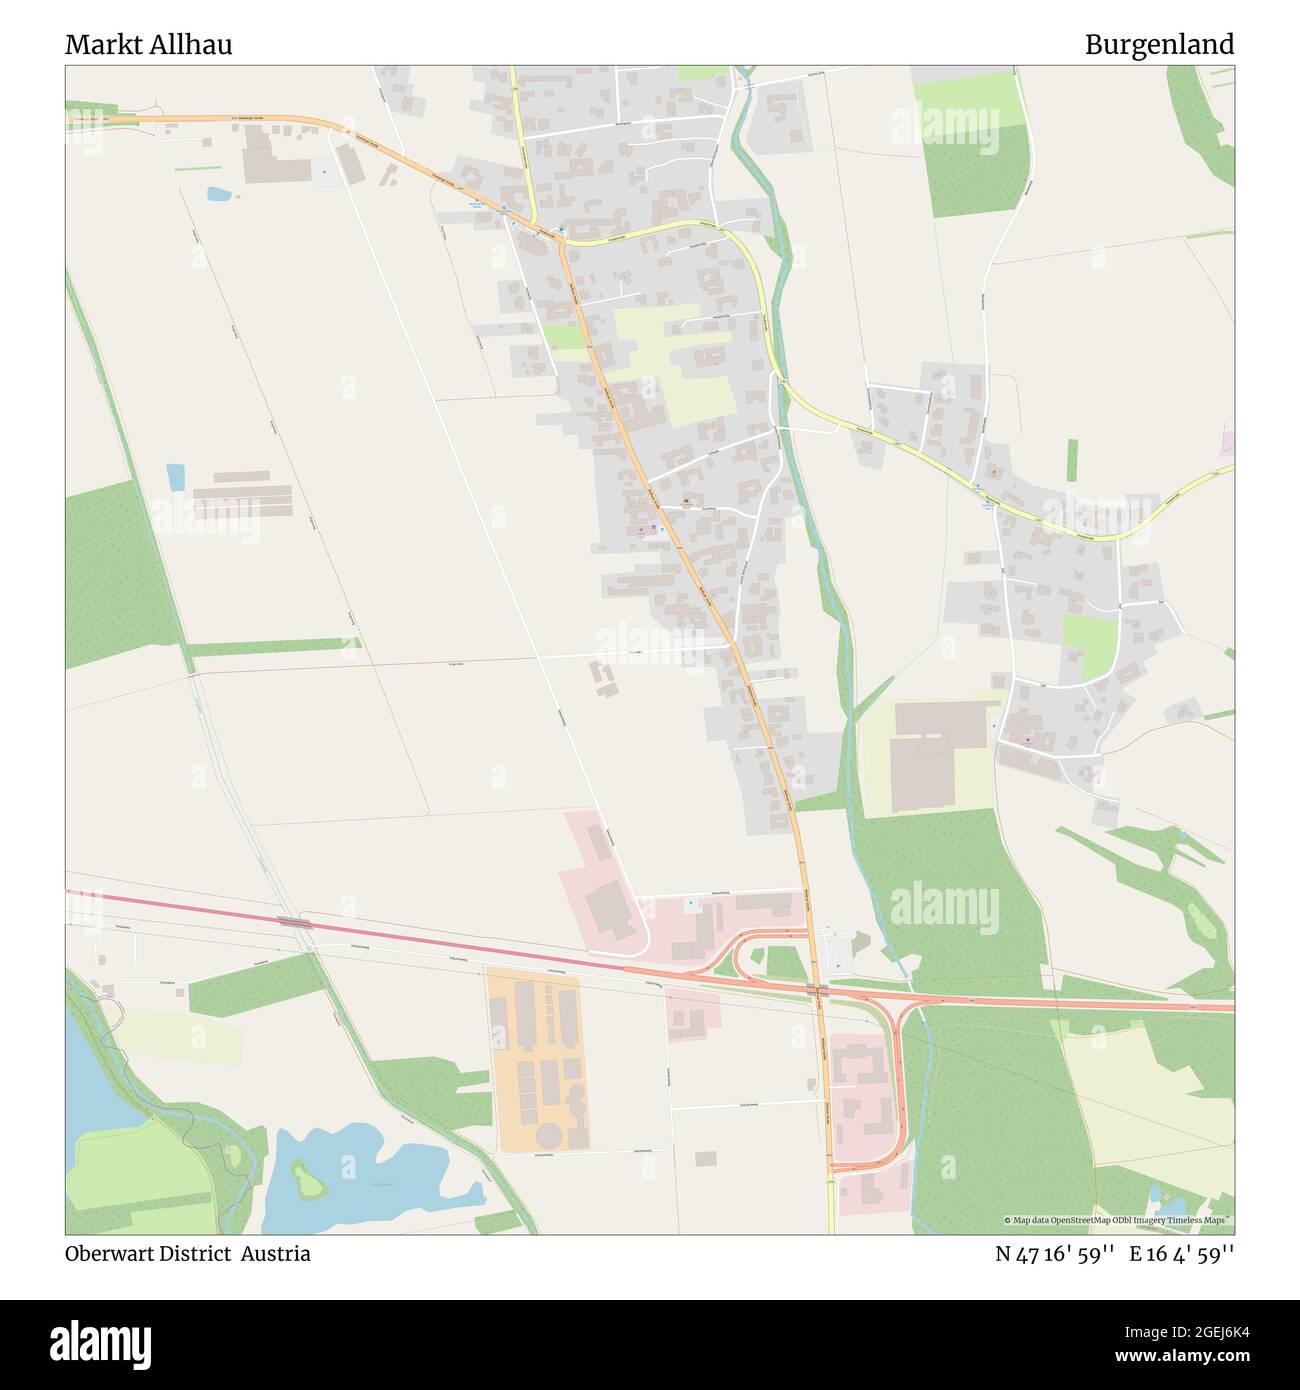 Markt Allhau, Oberwart District, Austria, Burgenland, N 47 16' 59'', E 16 4' 59'', map, Timeless Map published in 2021. Travelers, explorers and adventurers like Florence Nightingale, David Livingstone, Ernest Shackleton, Lewis and Clark and Sherlock Holmes relied on maps to plan travels to the world's most remote corners, Timeless Maps is mapping most locations on the globe, showing the achievement of great dreams Stock Photo